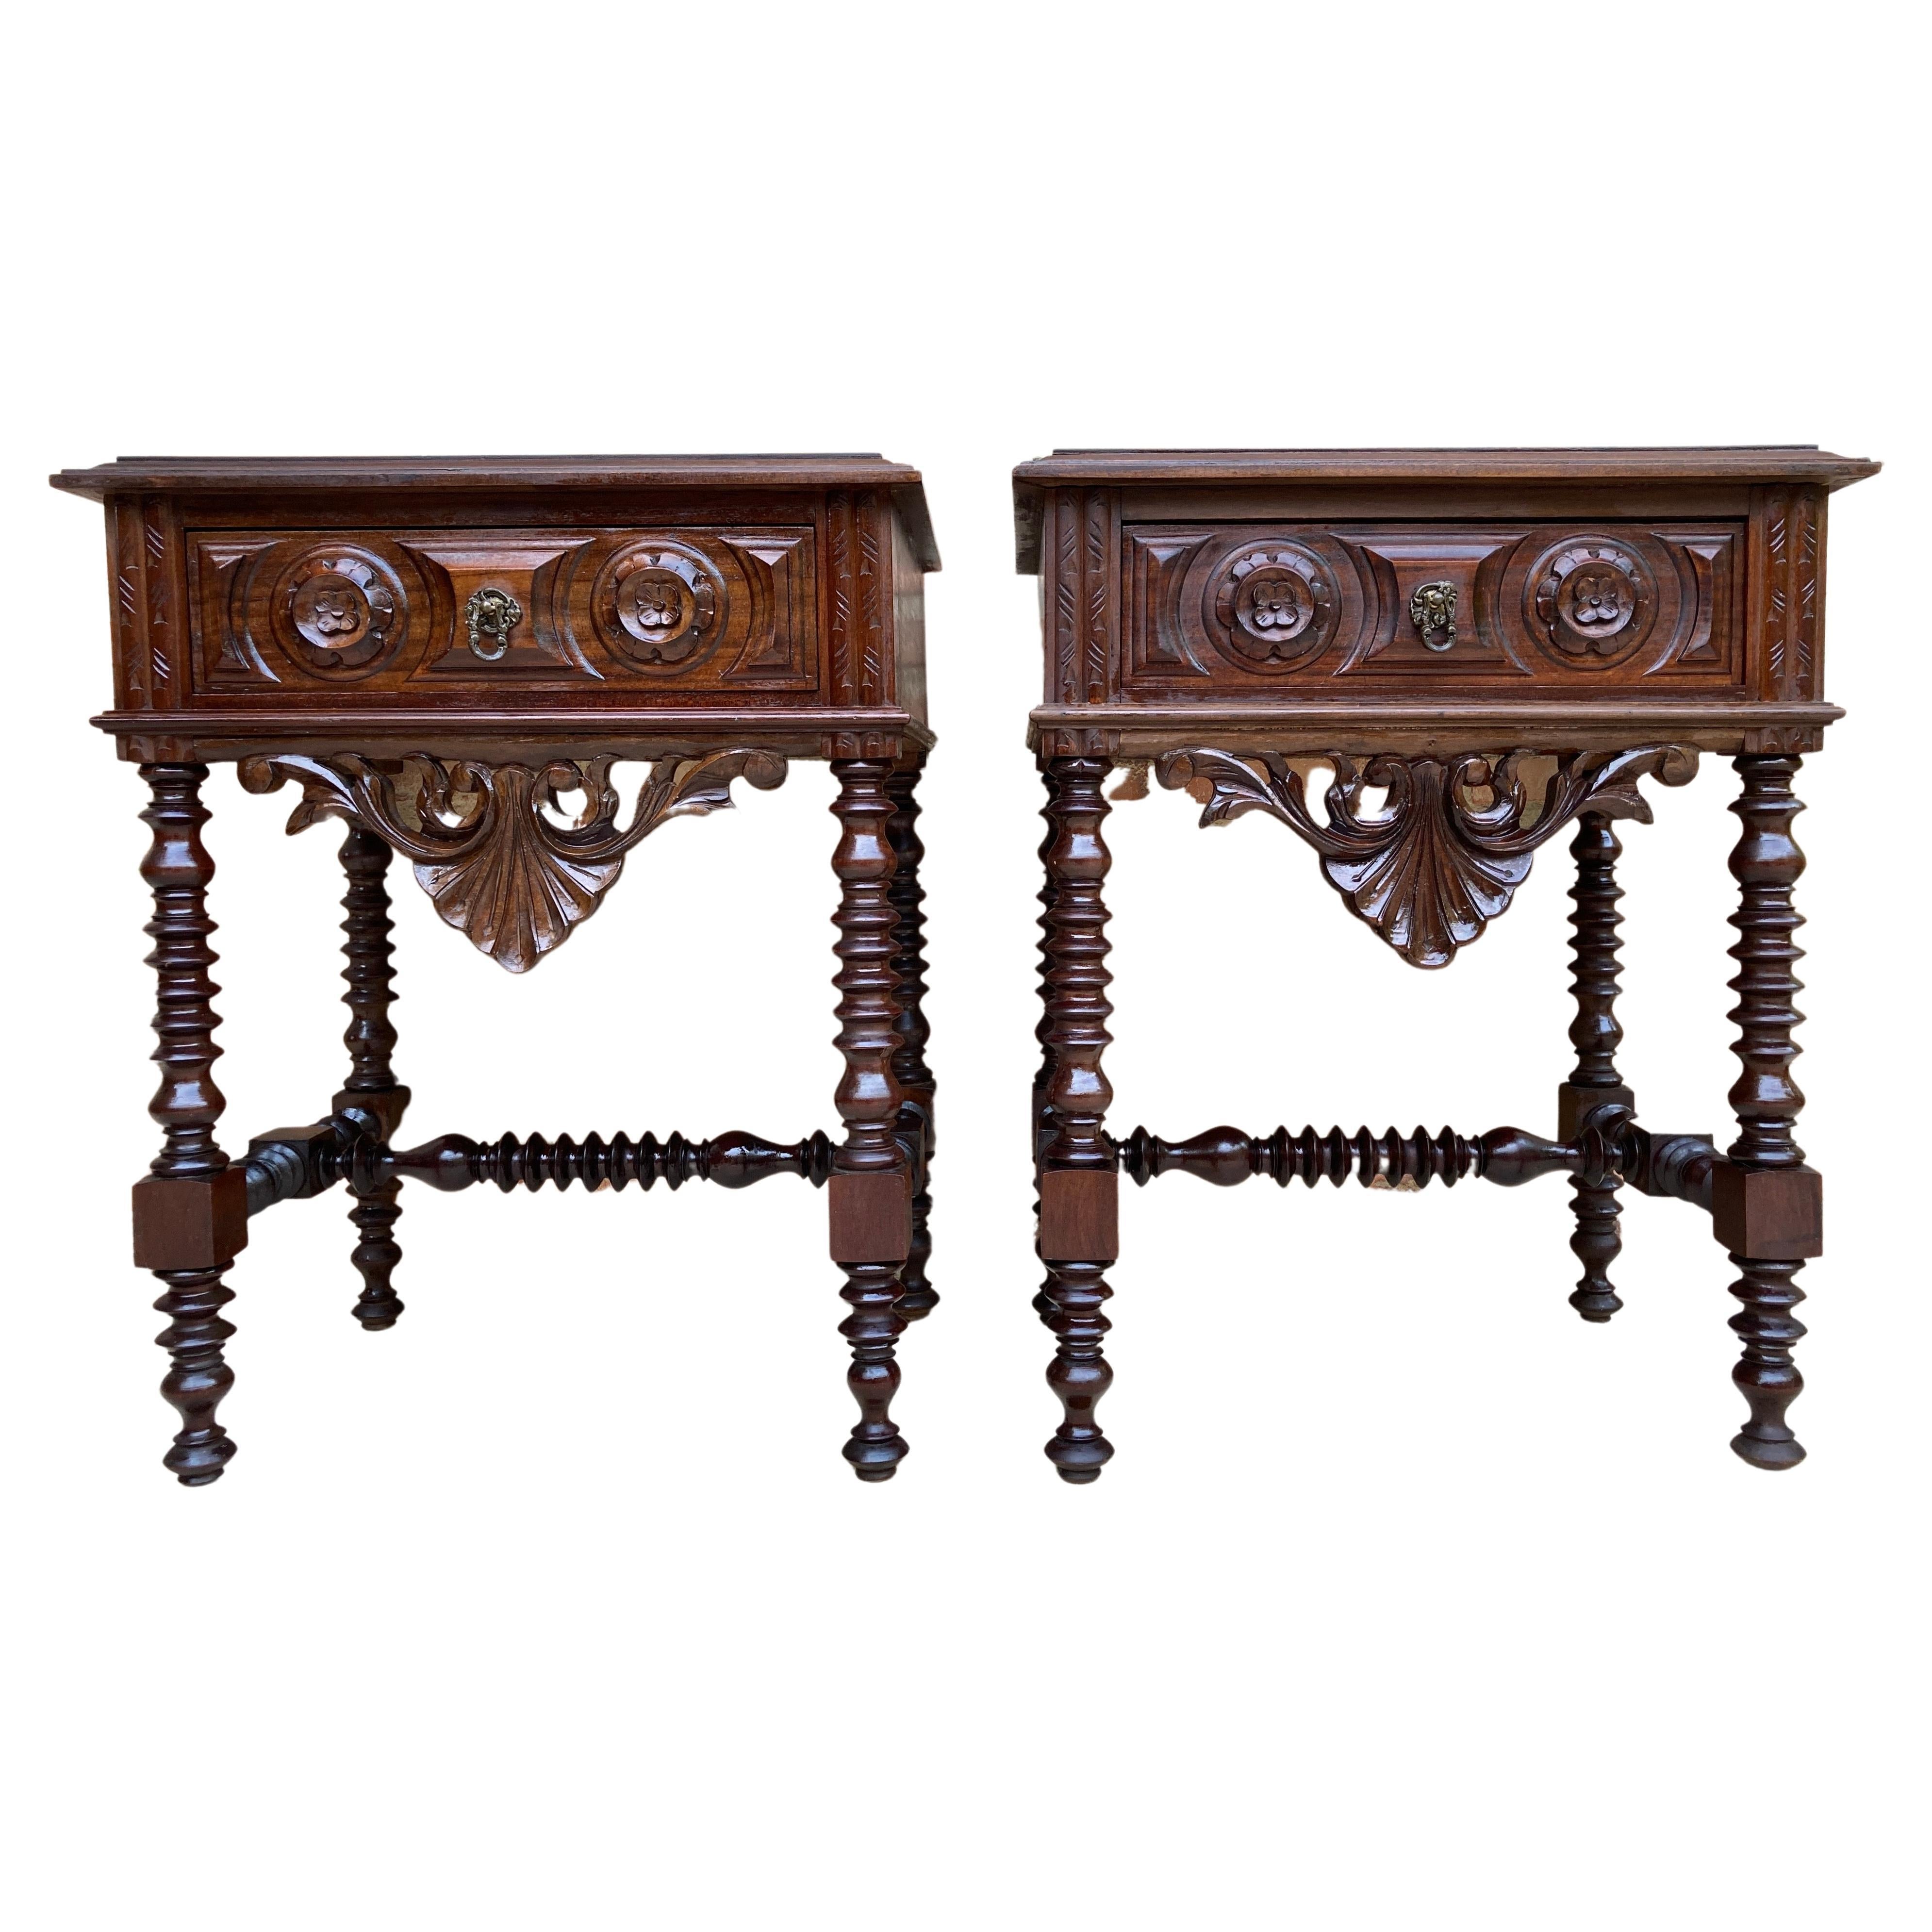 20th Century Solid Carved French Nightstands with Turned Columns and One Drawer 